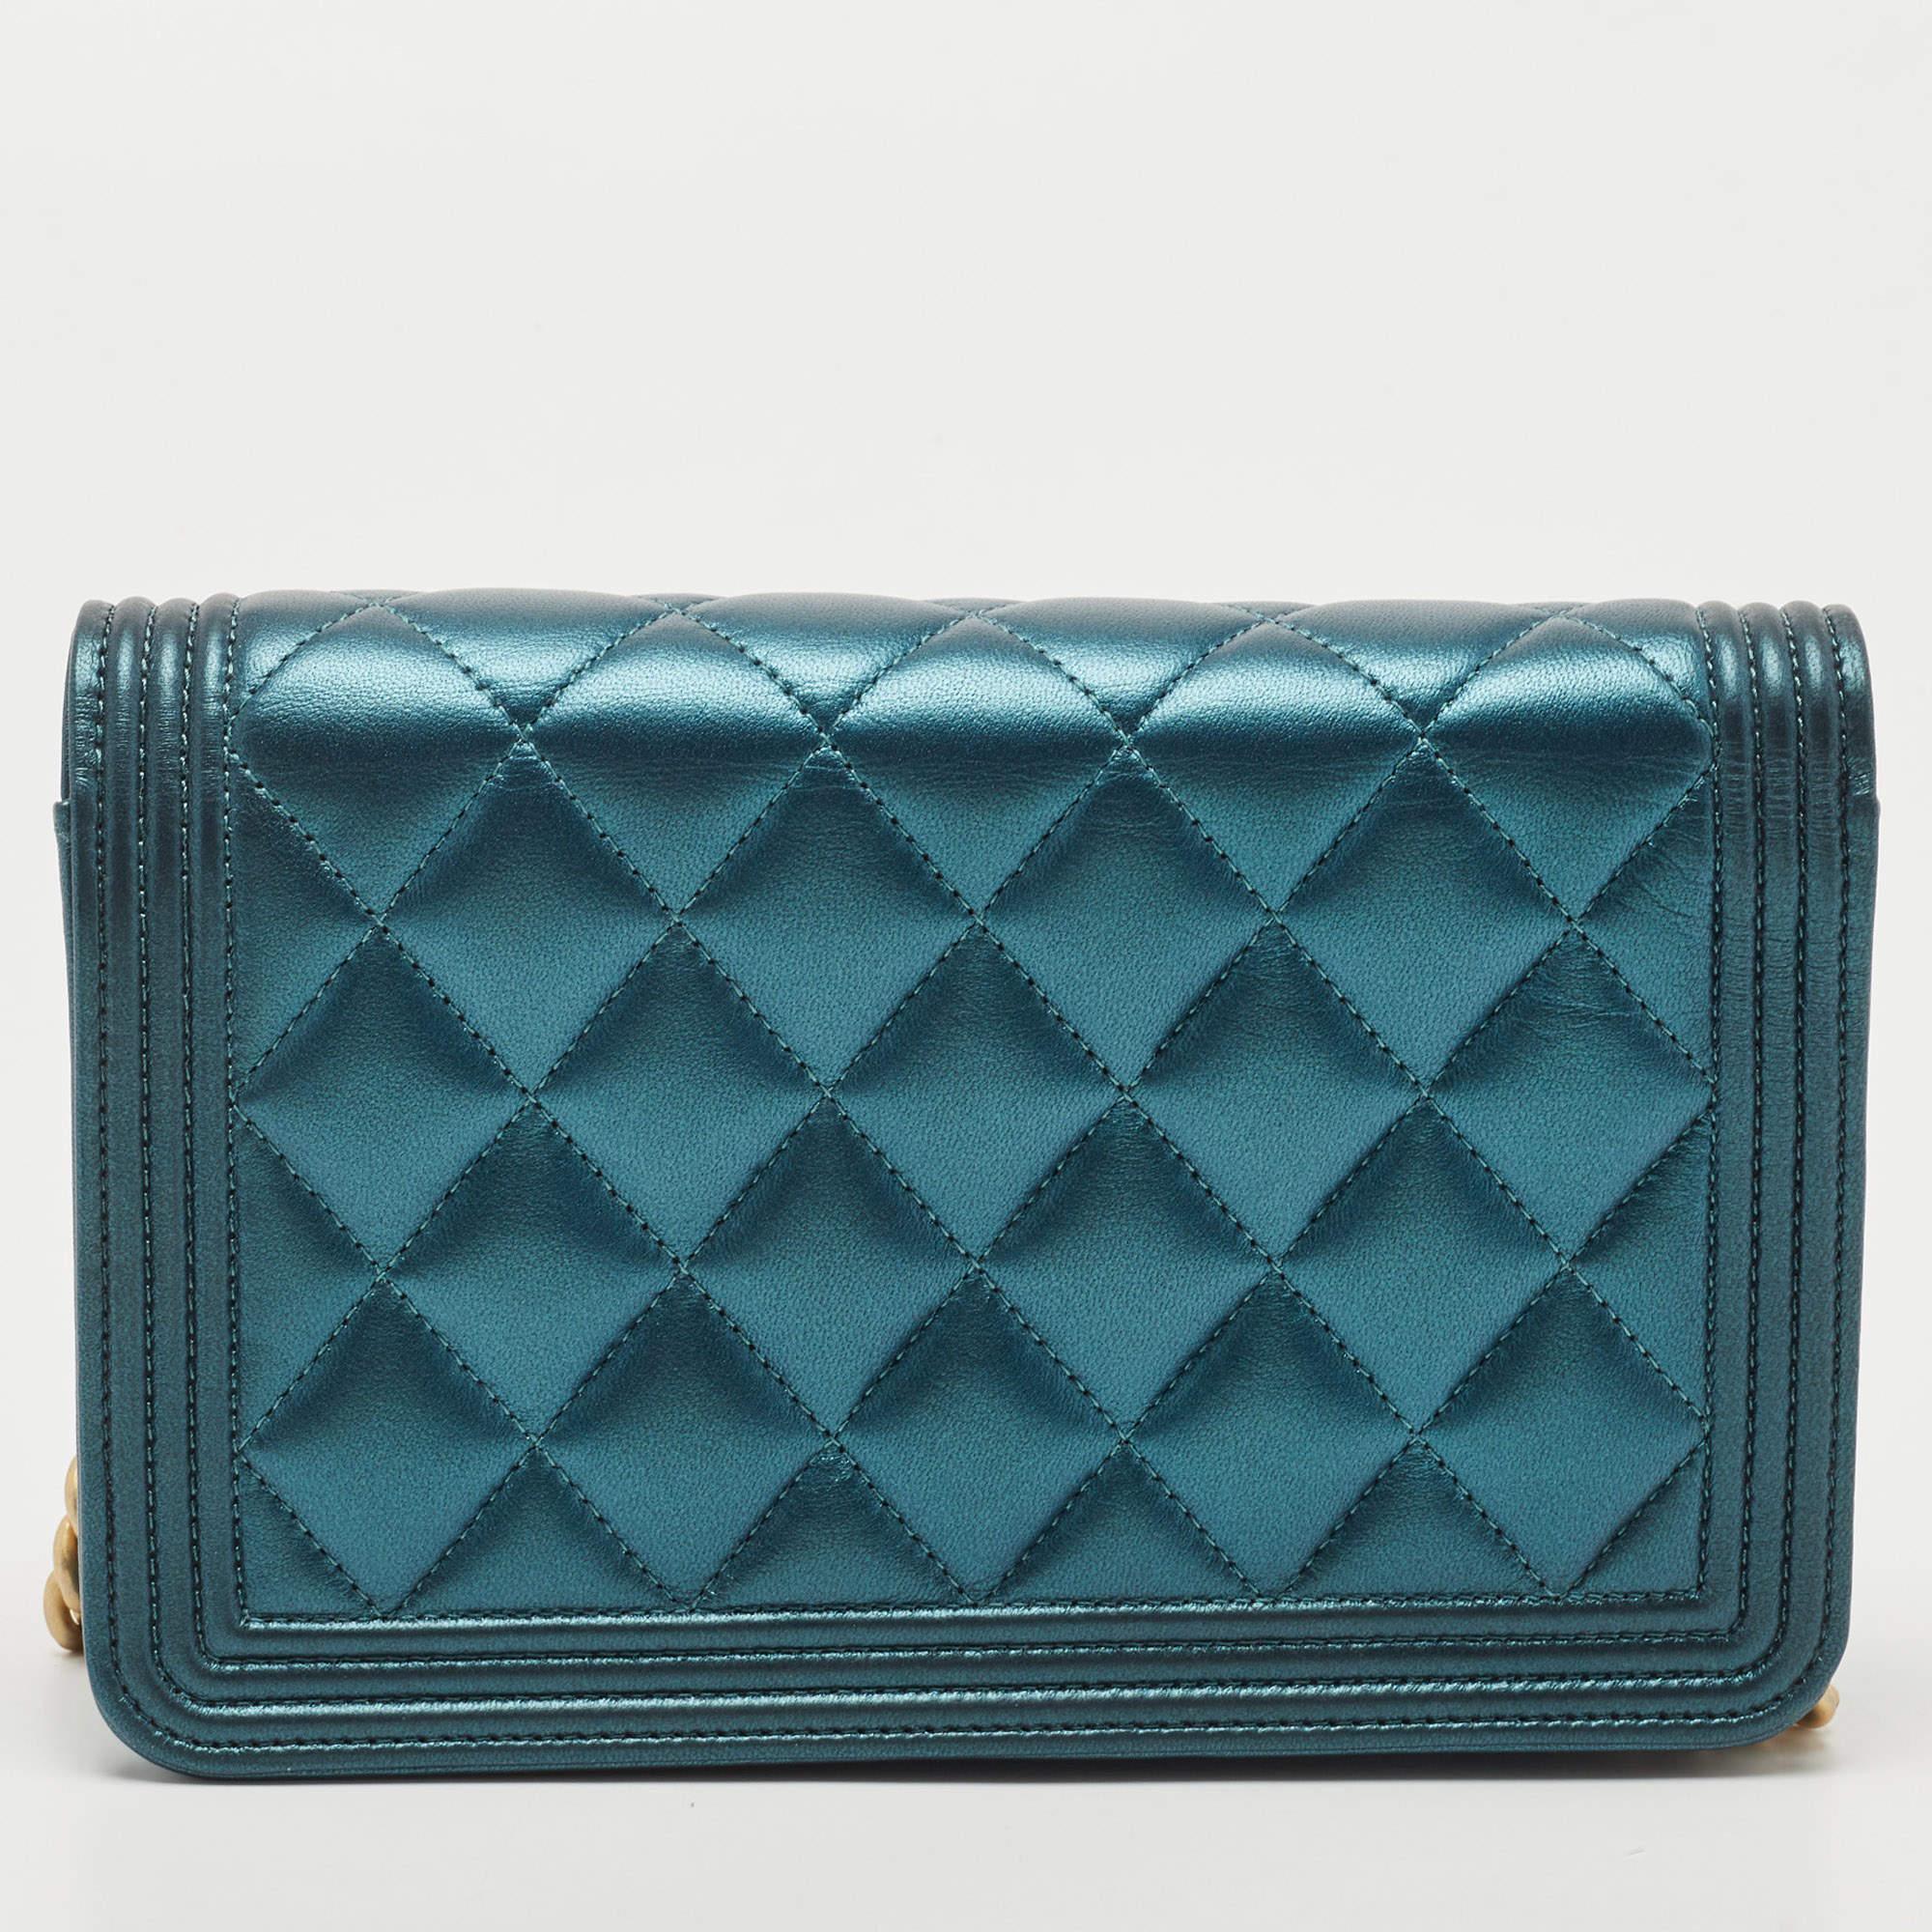 The Chanel WOC is a captivating blend of luxury and edginess. Crafted from supple dark green leather, it features the iconic diamond quilted pattern, enhanced by a metallic finish for a glamorous touch. The Boy WOC design offers versatility with its